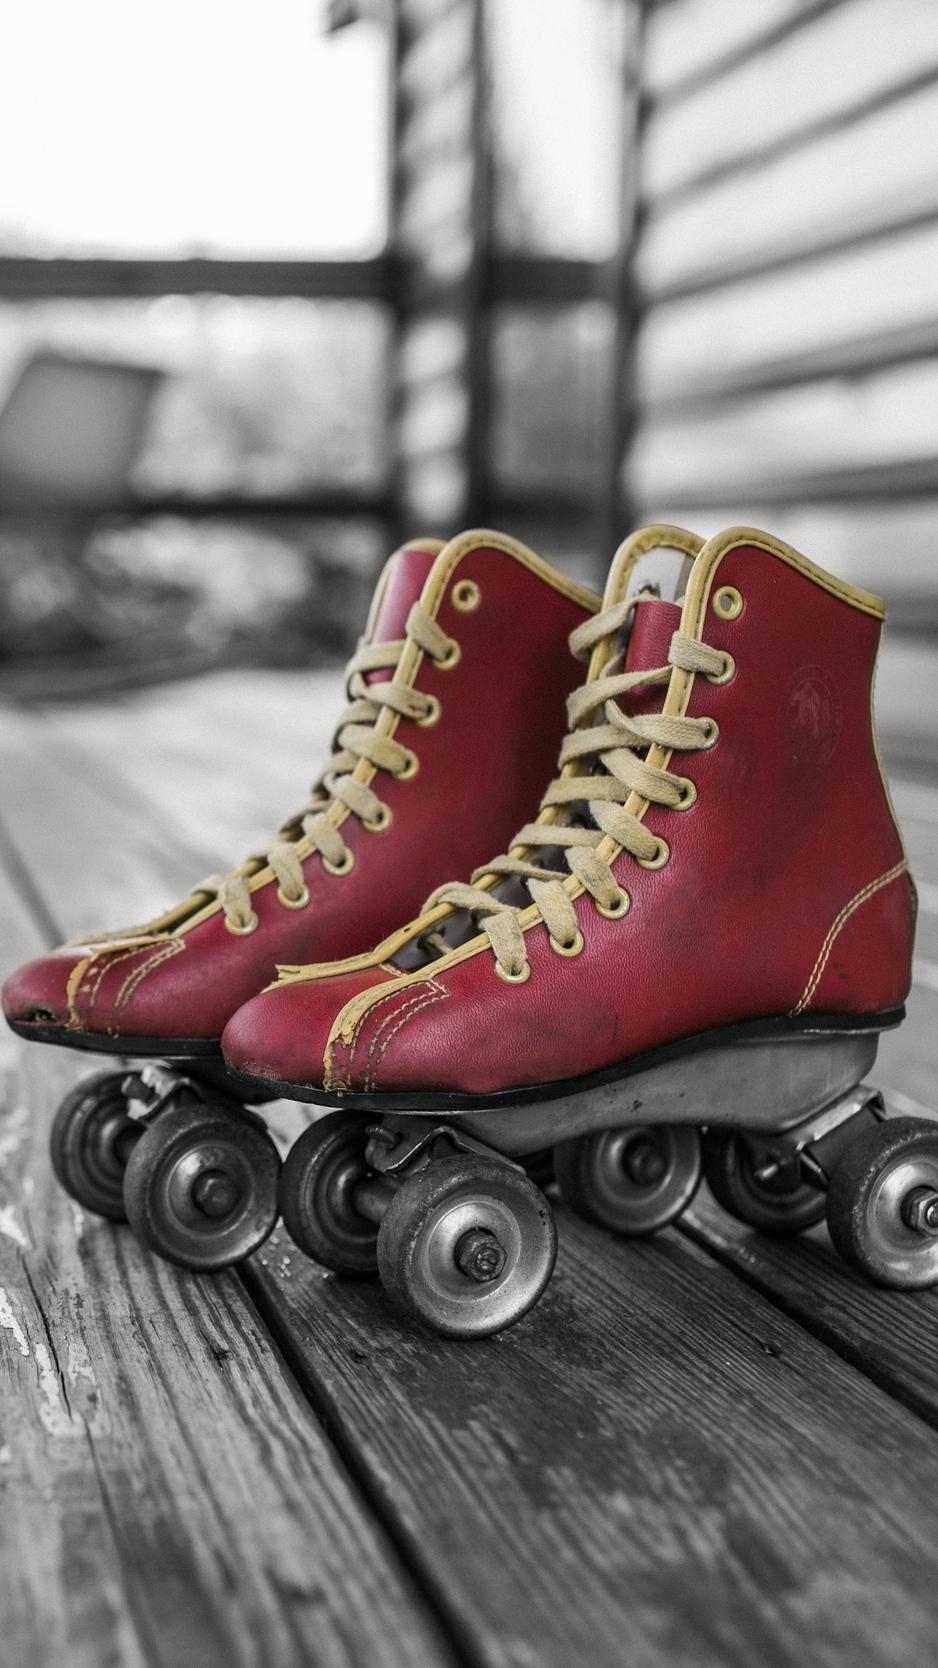 Download wallpaper 938x1668 rollers, skates, retro, red